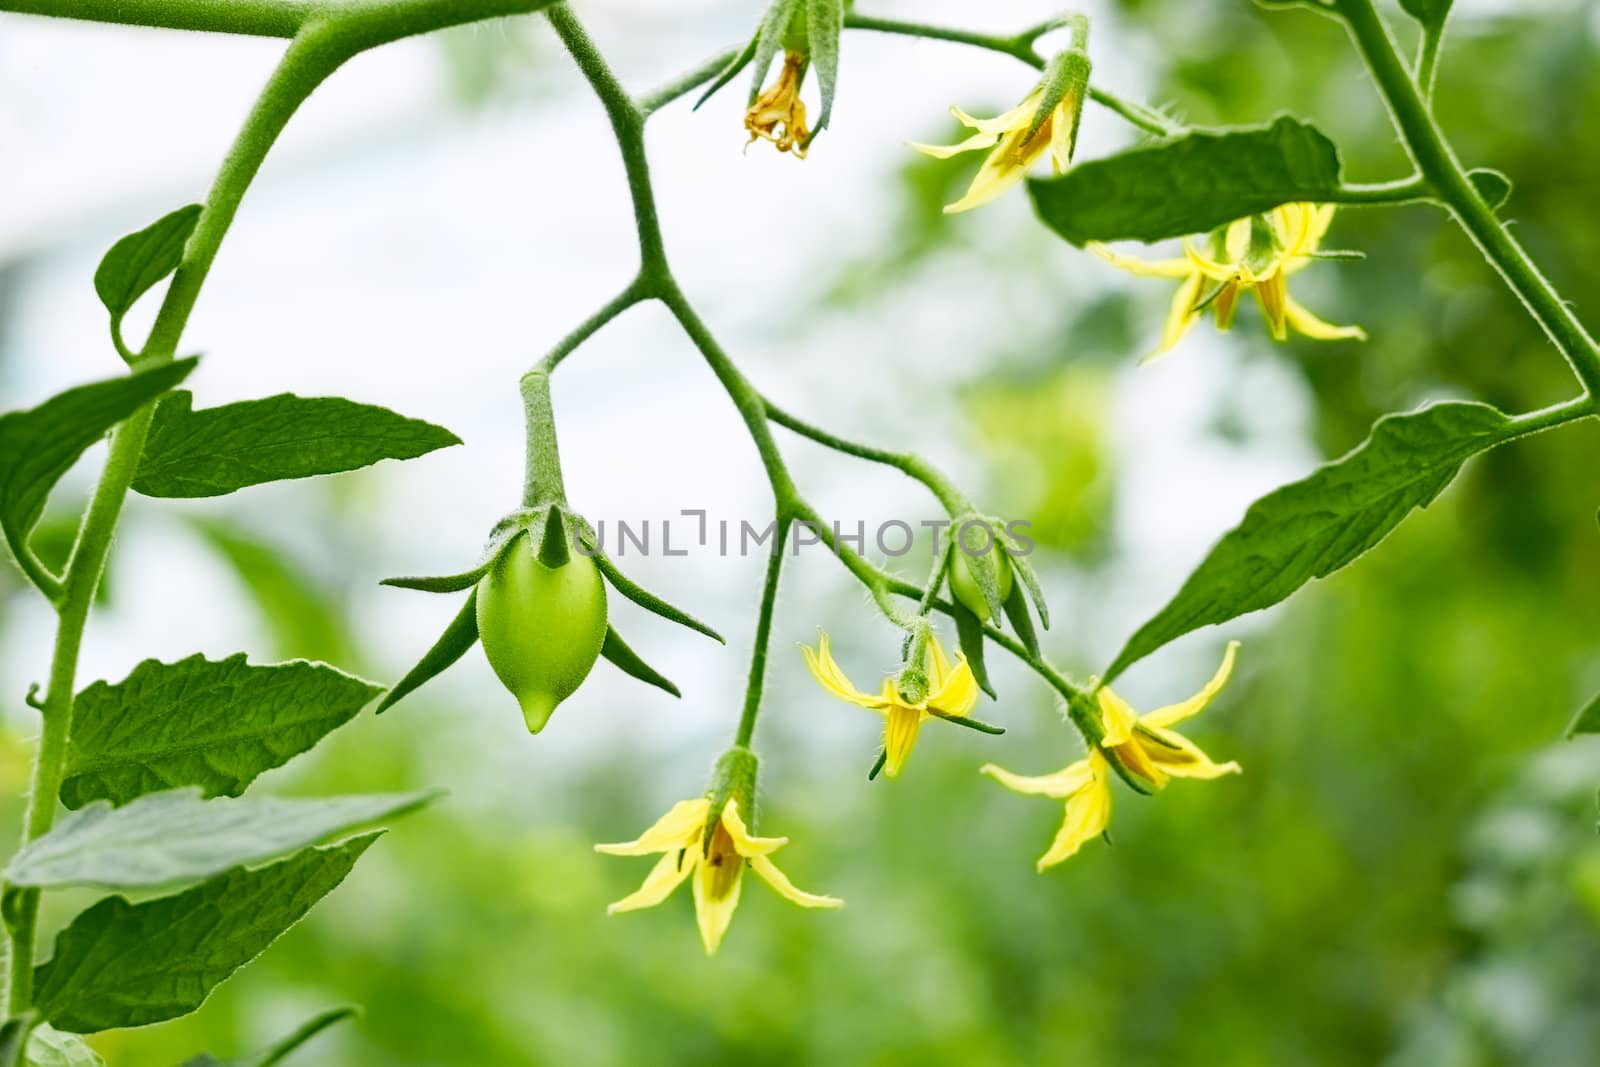 Tomatoes flowers and green fruits close up by qiiip